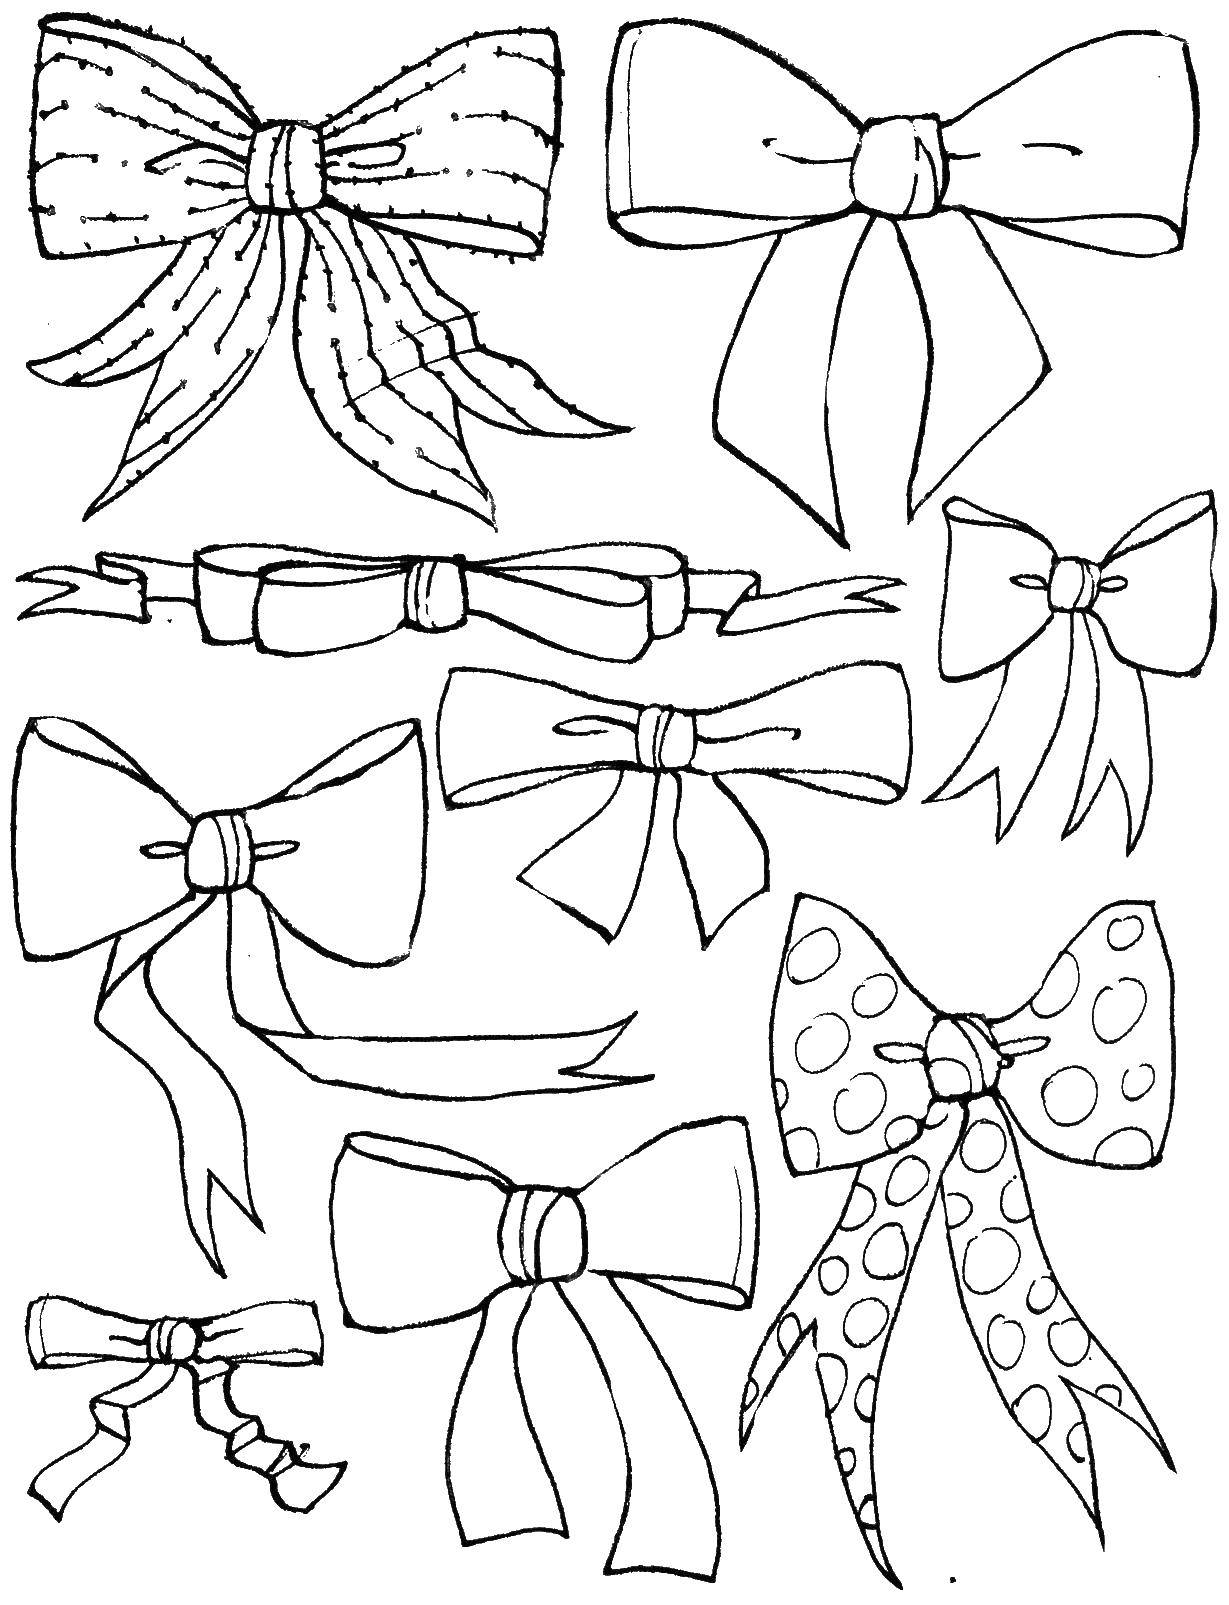 Coloring Bows. Category The hair. Tags:  bows.